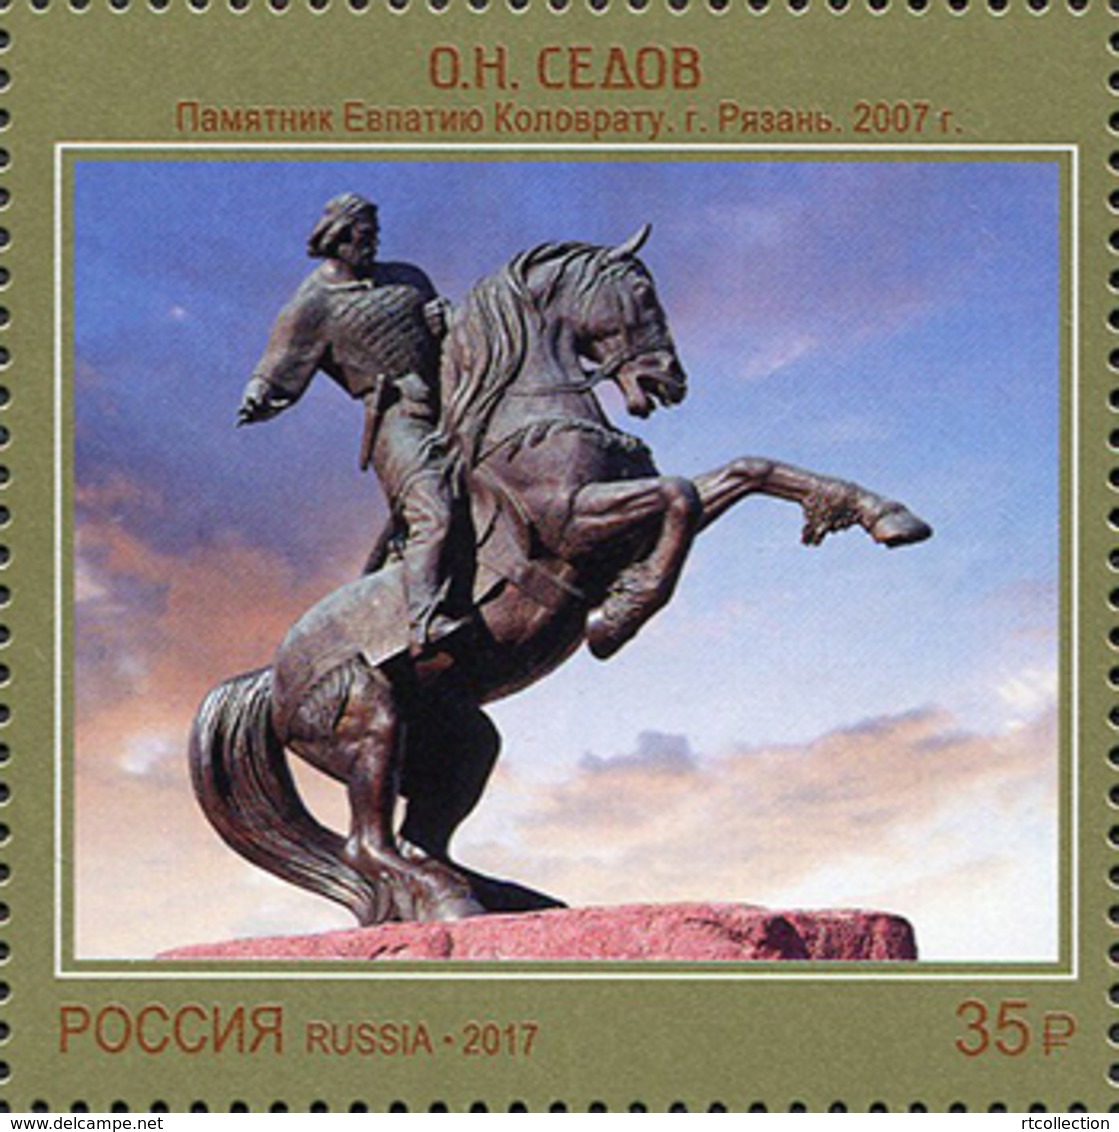 Russia 2017 - One Contemporary Russian Art Modern Sculpture Monument Evpaty Kolovrat Paintings Horse Riding Stamp MNH - Monumentos